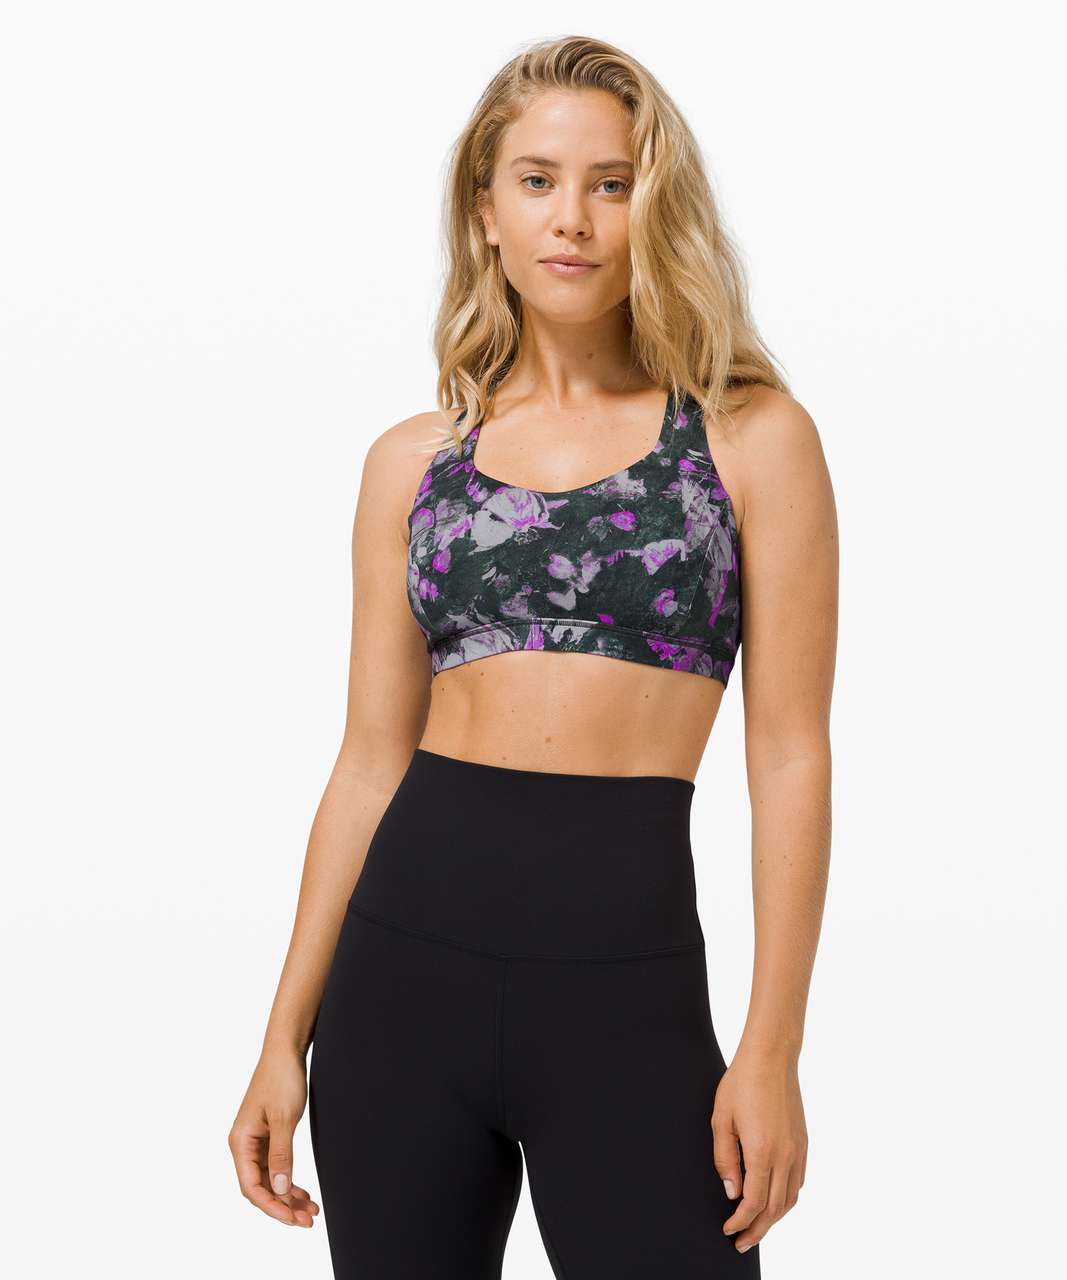 Lululemon Free To Be Serene Bra *Light Support, C/D Cup - Floral Shift Multi